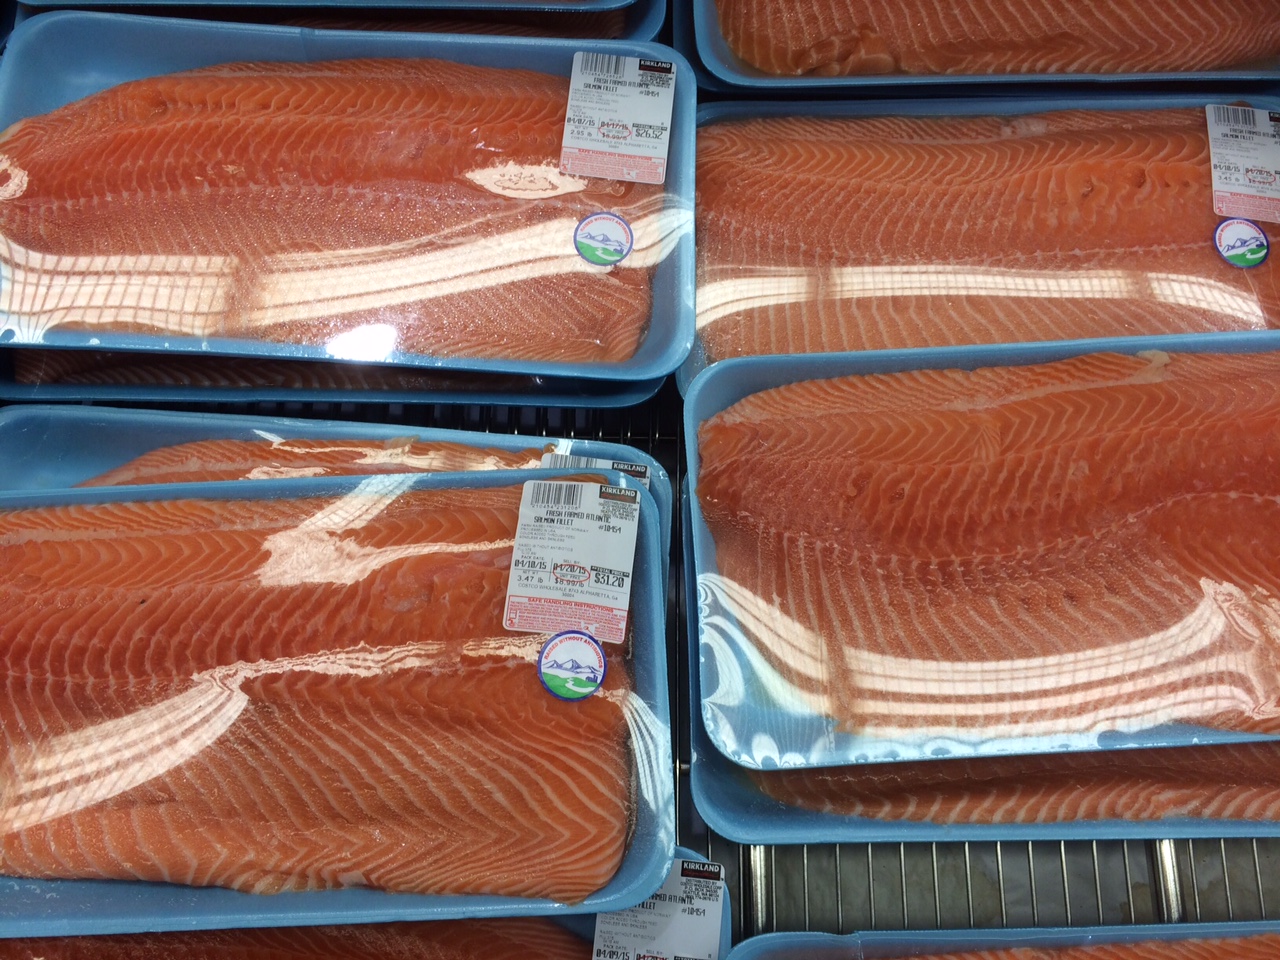 Chilean salmon disappearing from Costco stores as Sam's Club slashes price  - Undercurrent News